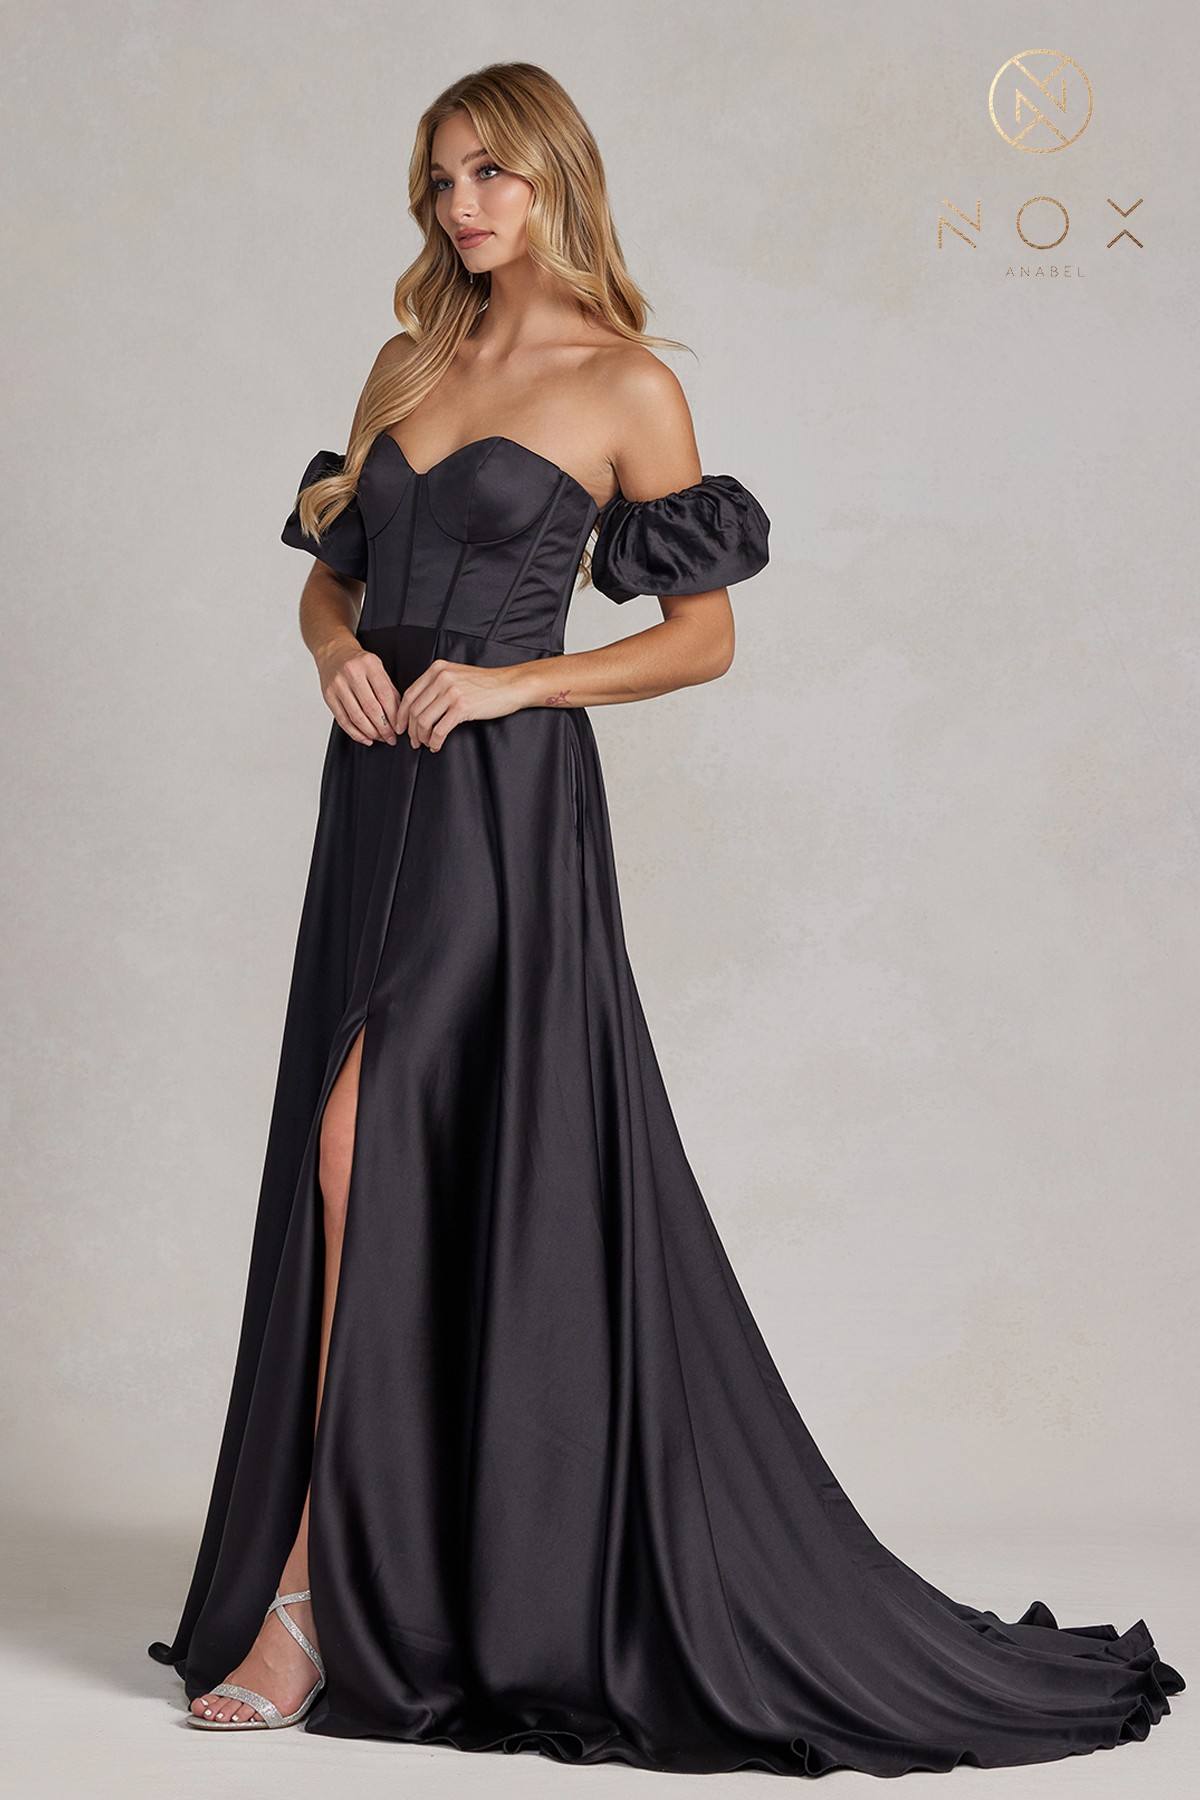 Nox Anabel K1122 Floor Length A-line Satin Gown with Detachable Puff Sleeves